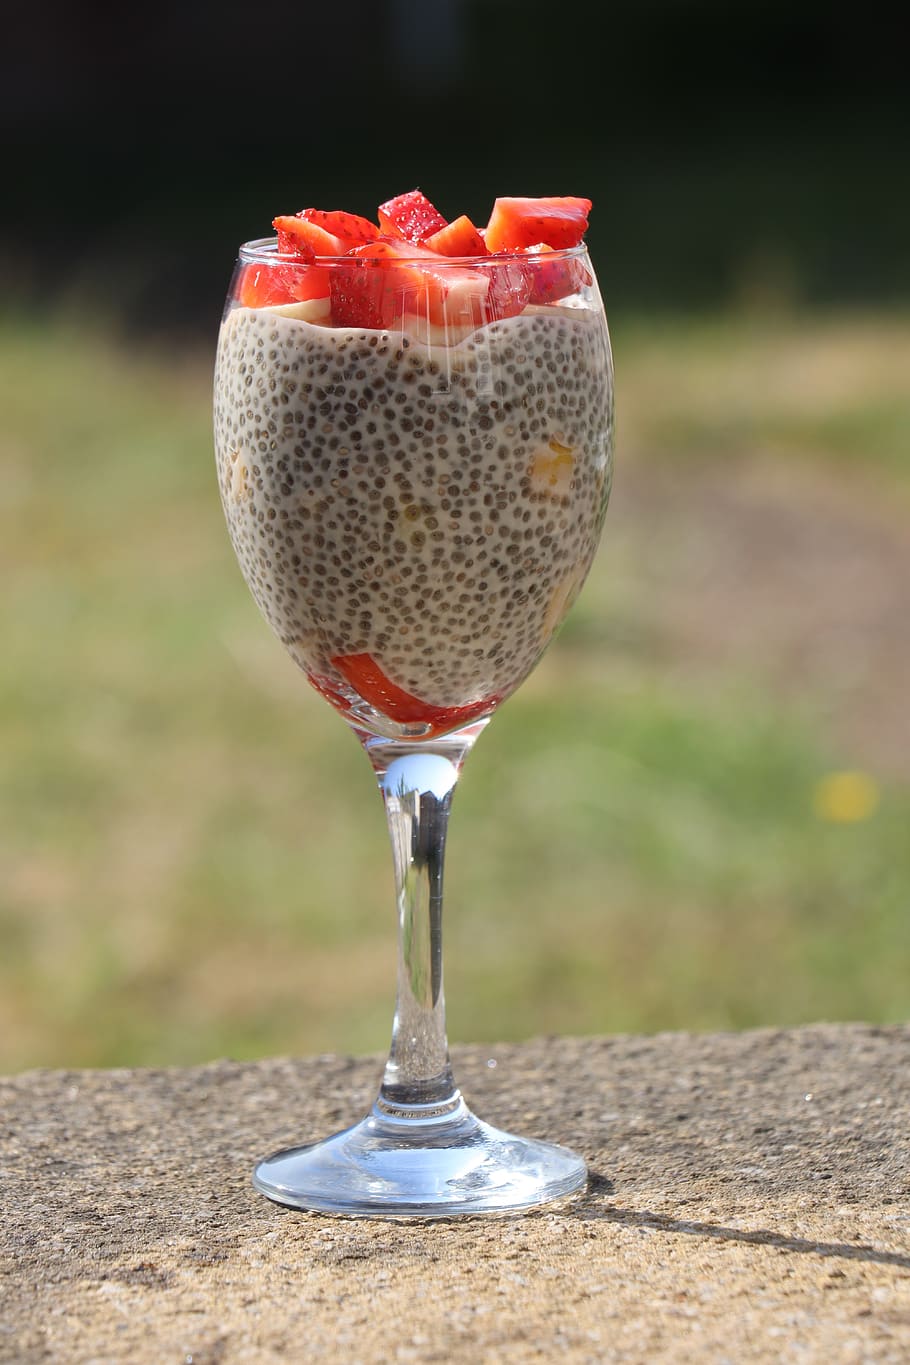 chia seeds, chia seed pudding, pudding, dieting, diet, fresh, fruit, breakfast, meal, homemade